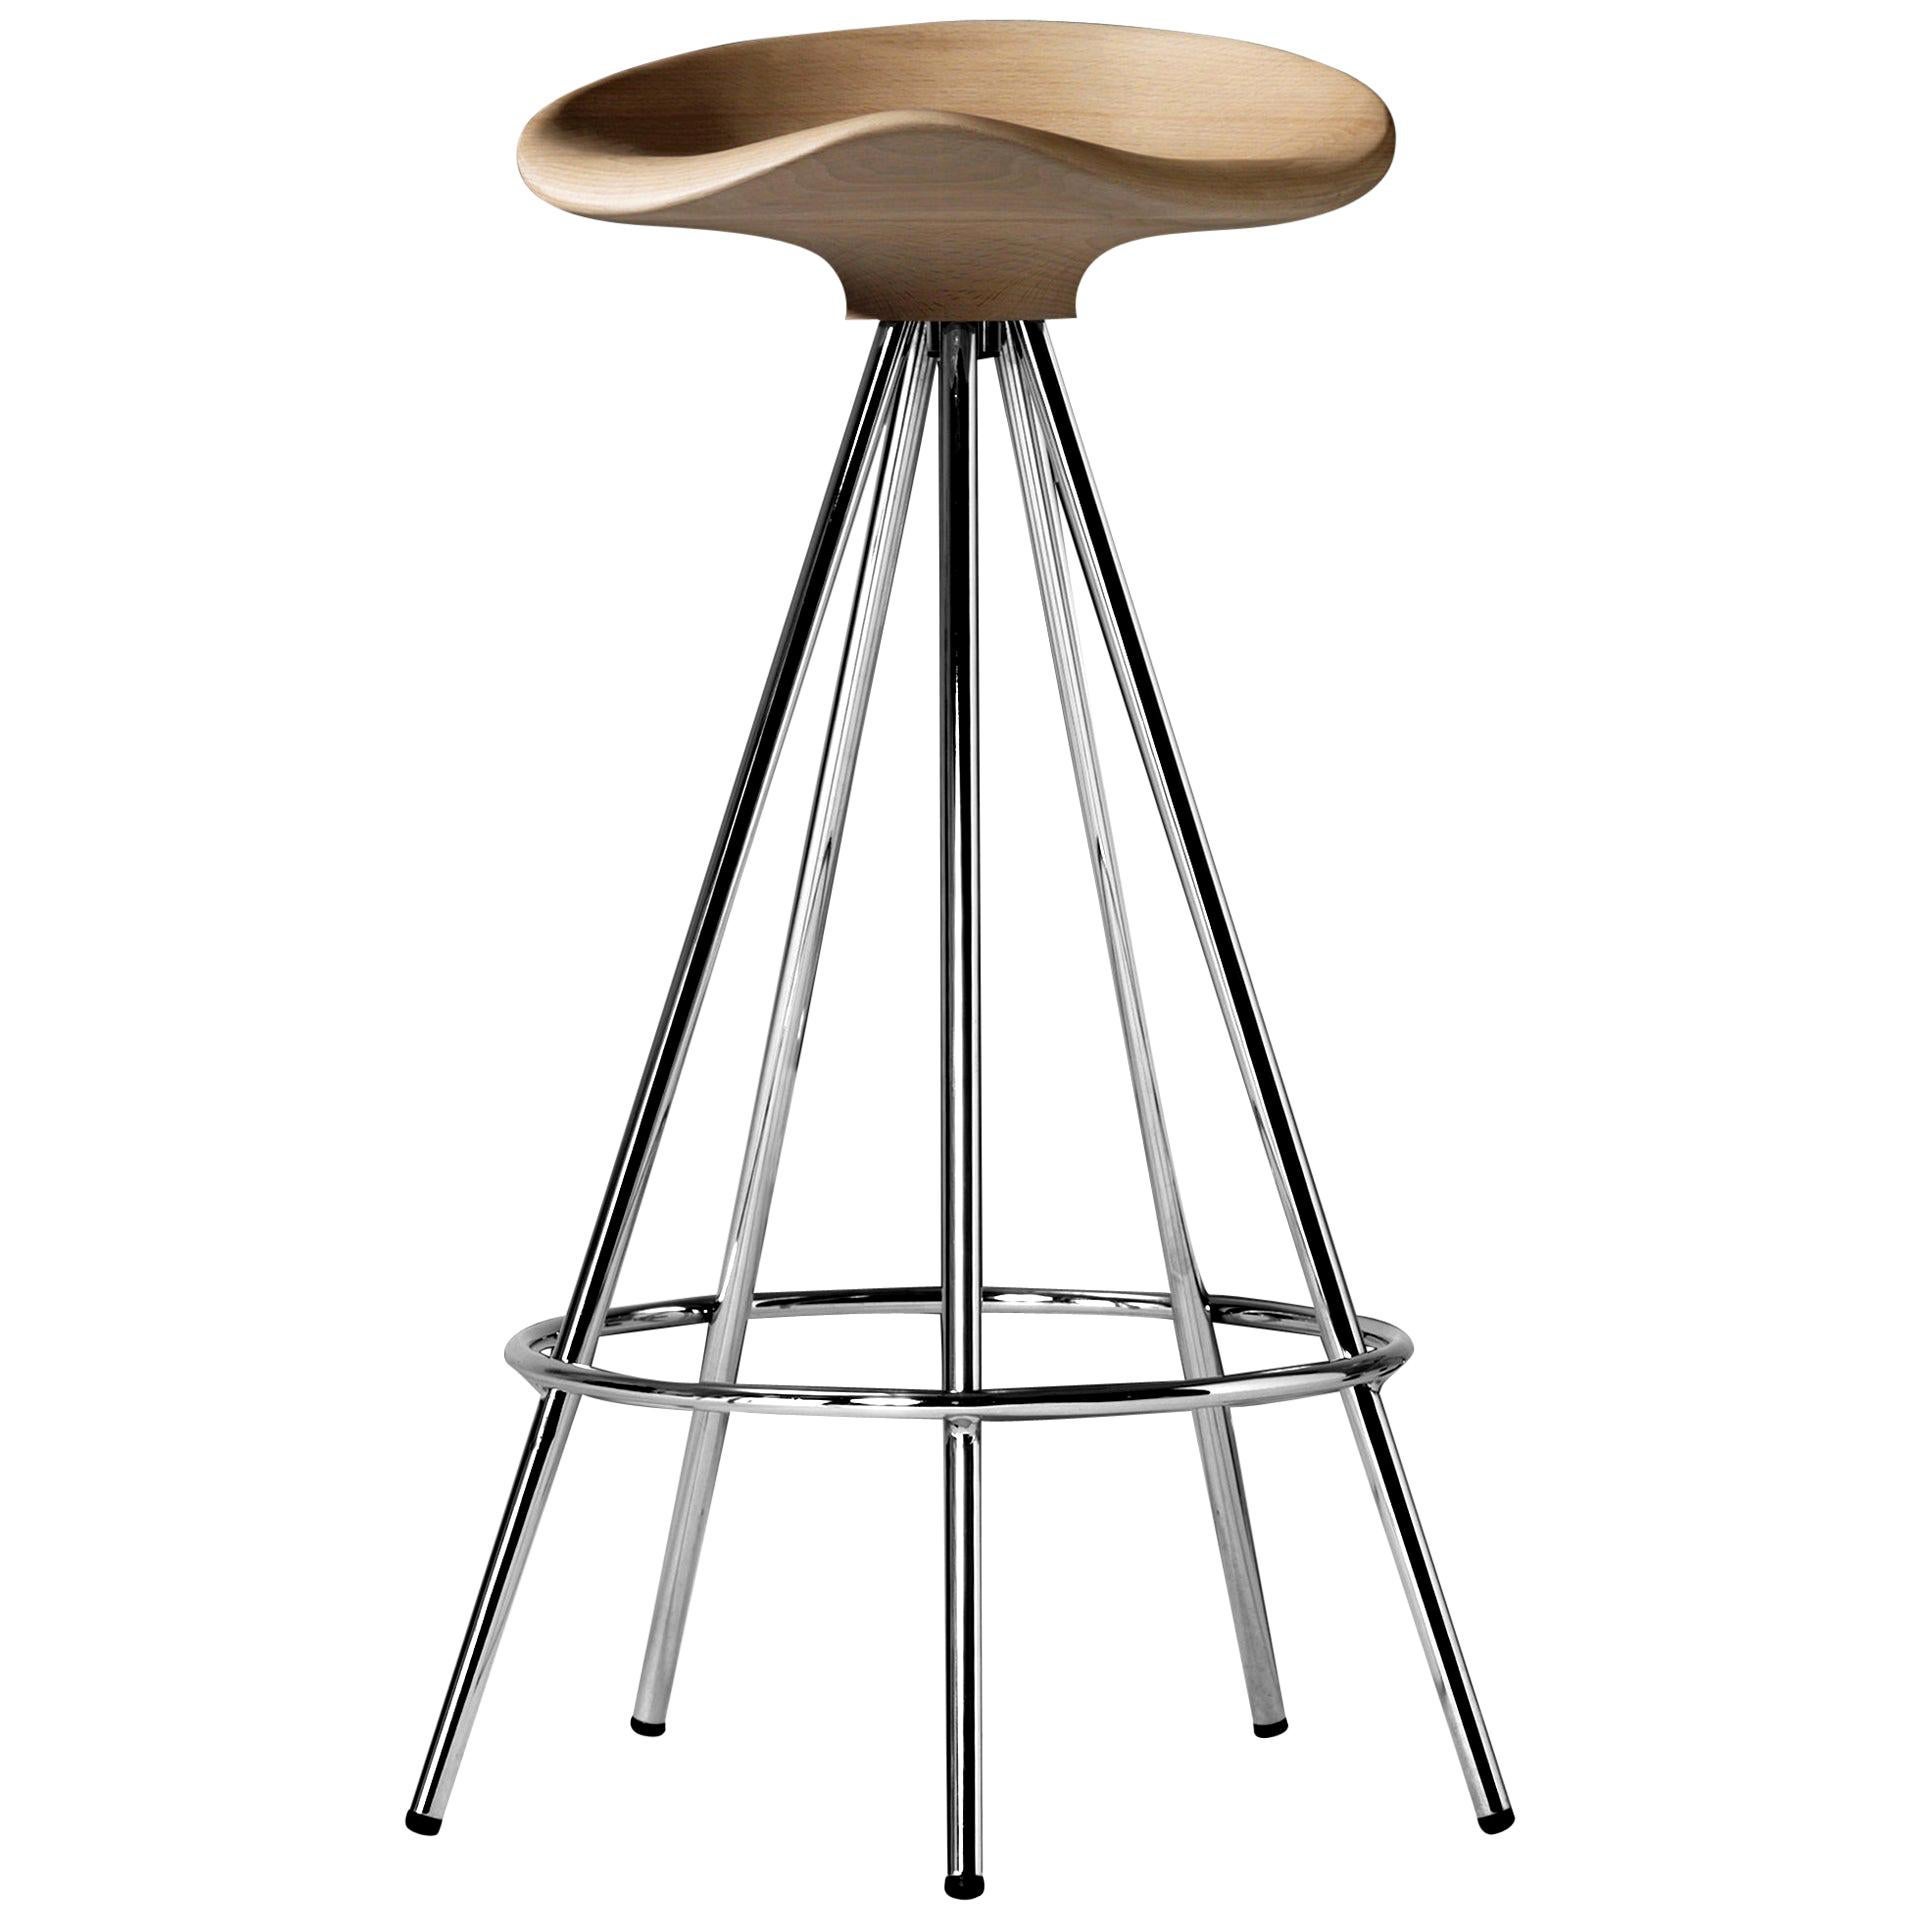 Pepe Cortes Contemporary Jamaica Steel Wood Stool for BD Barcelona